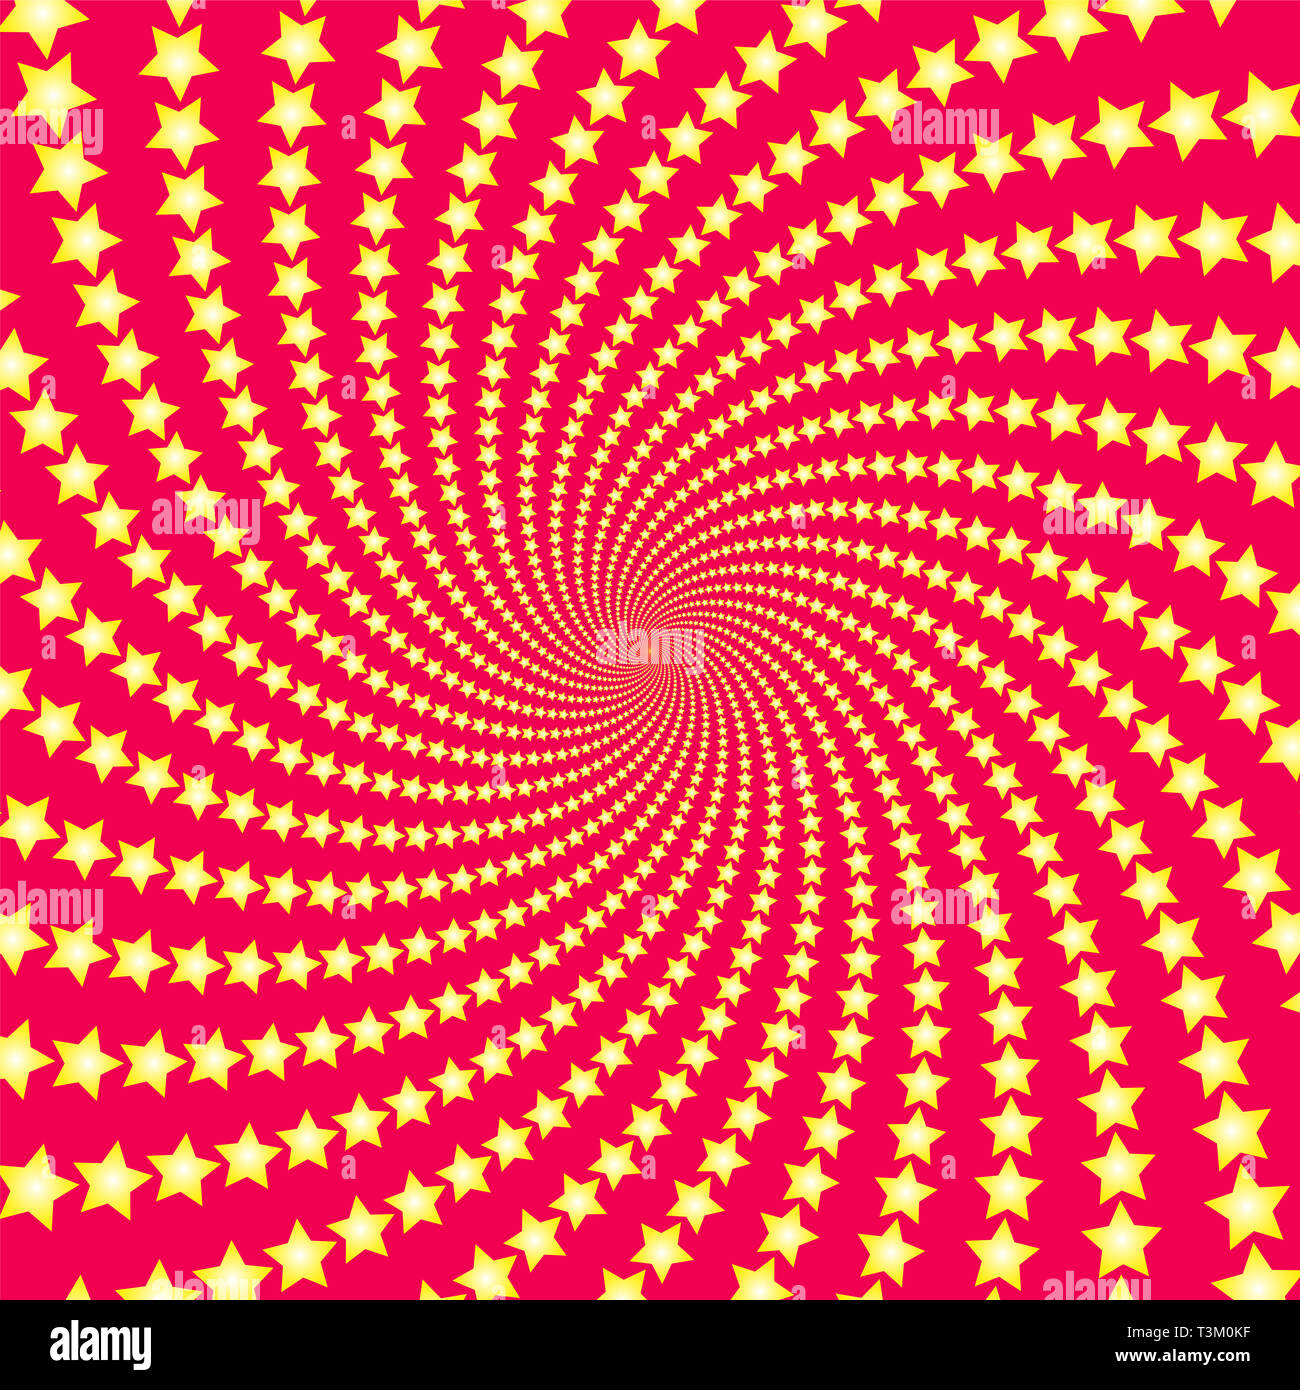 Spiral star pattern. Yellow shooting stars on red background. Twisted circular fractal illustration, powerful, dynamically, hypnotizing design. Stock Photo